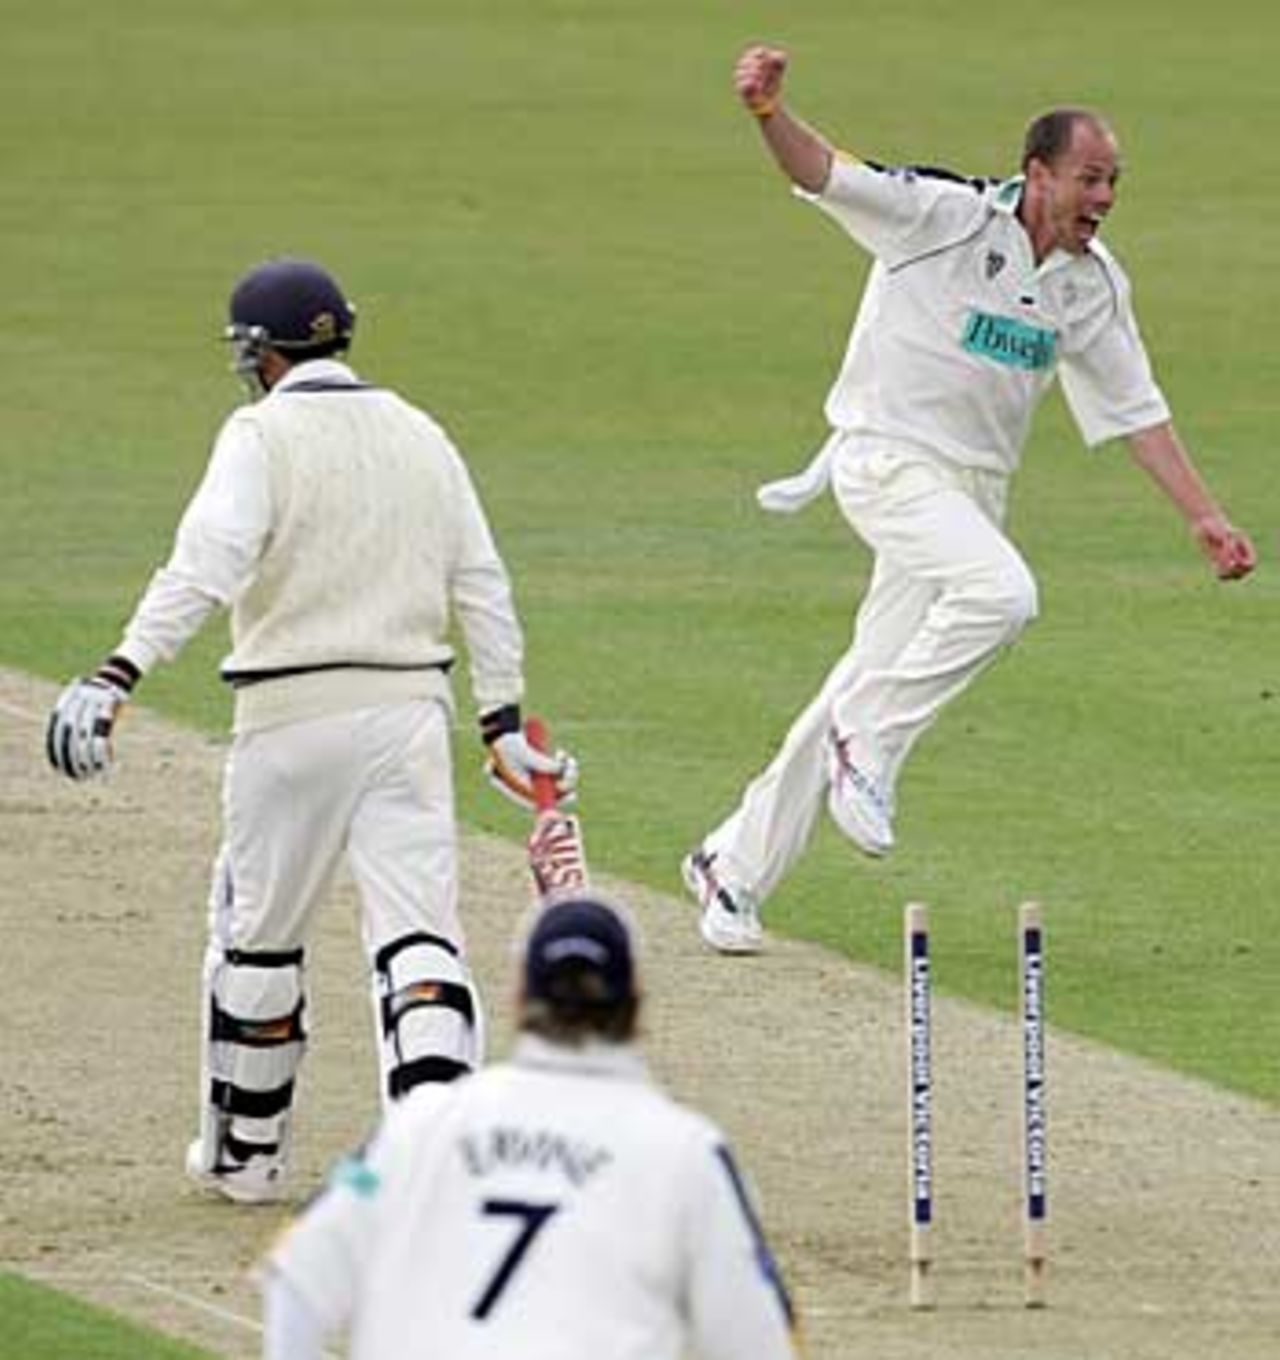 And another. Billy Taylor can't believe his luck as he grabs Paul Weekes' wicket en route to routing Middlesex for 98, Hampshire v Middlesex, Southampton, May 3, 2006